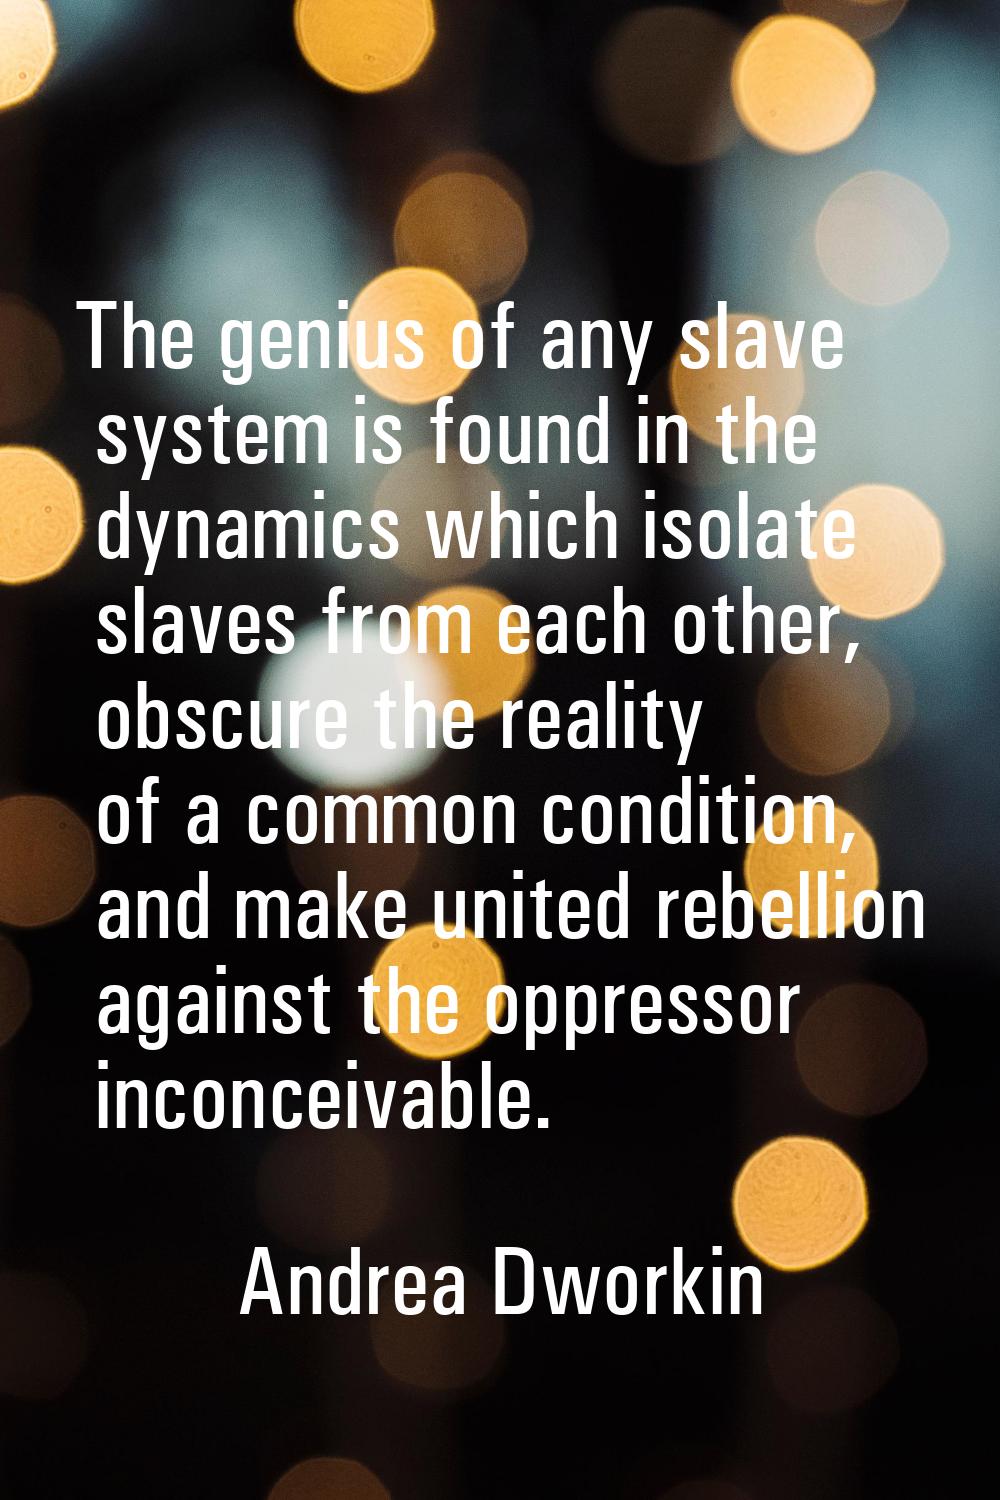 The genius of any slave system is found in the dynamics which isolate slaves from each other, obscu